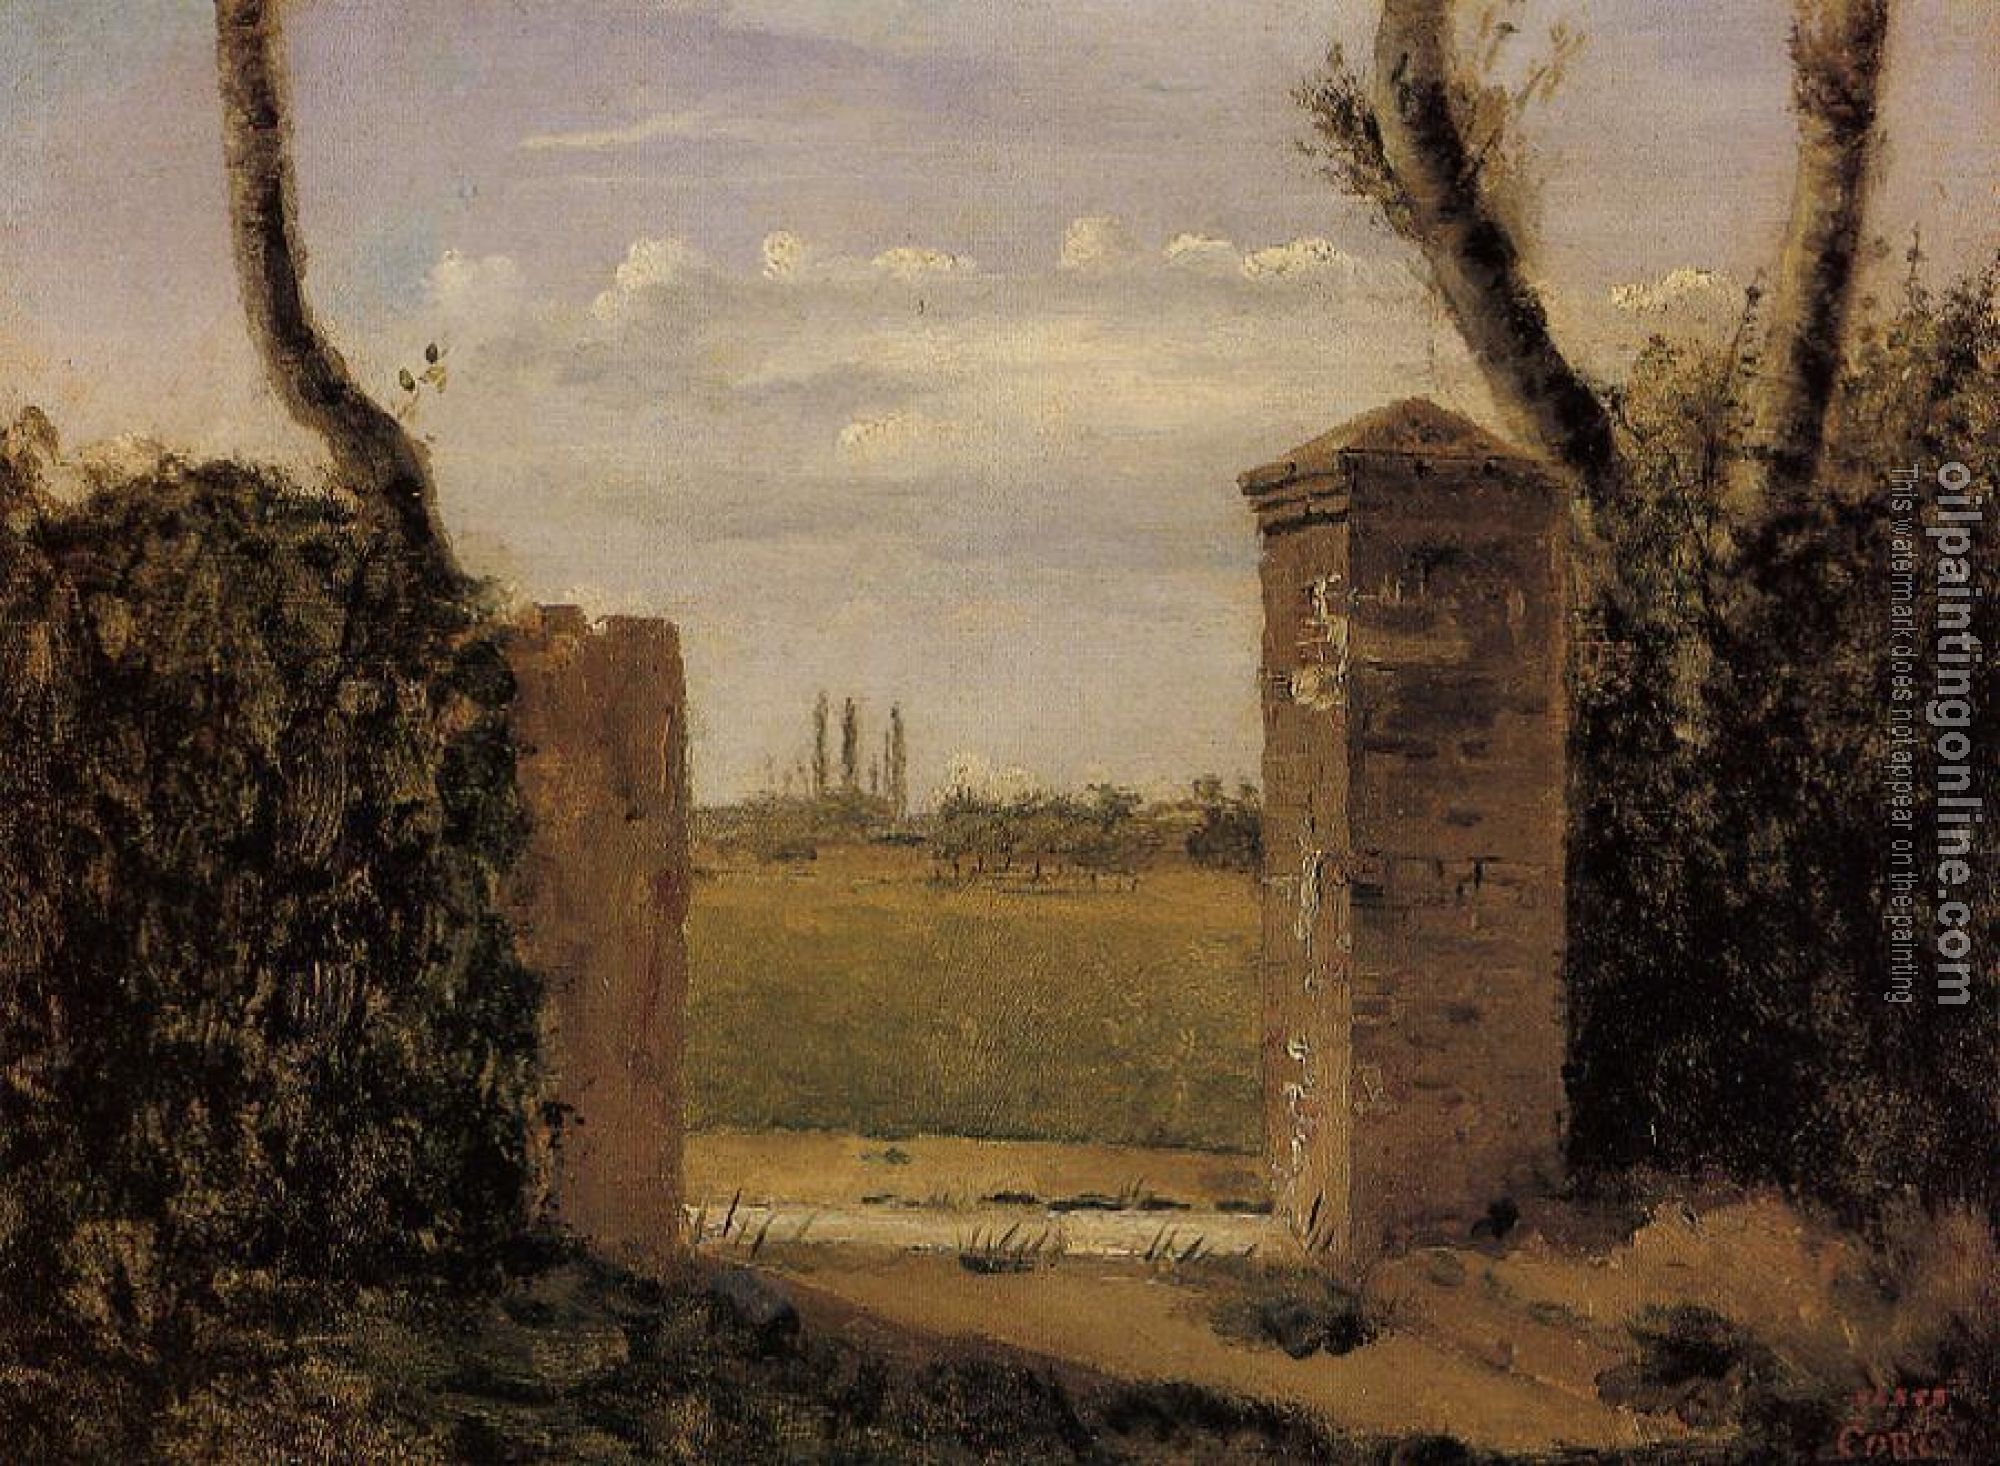 Corot, Jean-Baptiste-Camille - Boid-Guillaumi, near Rouen - A Gate Flanked by Two Posts